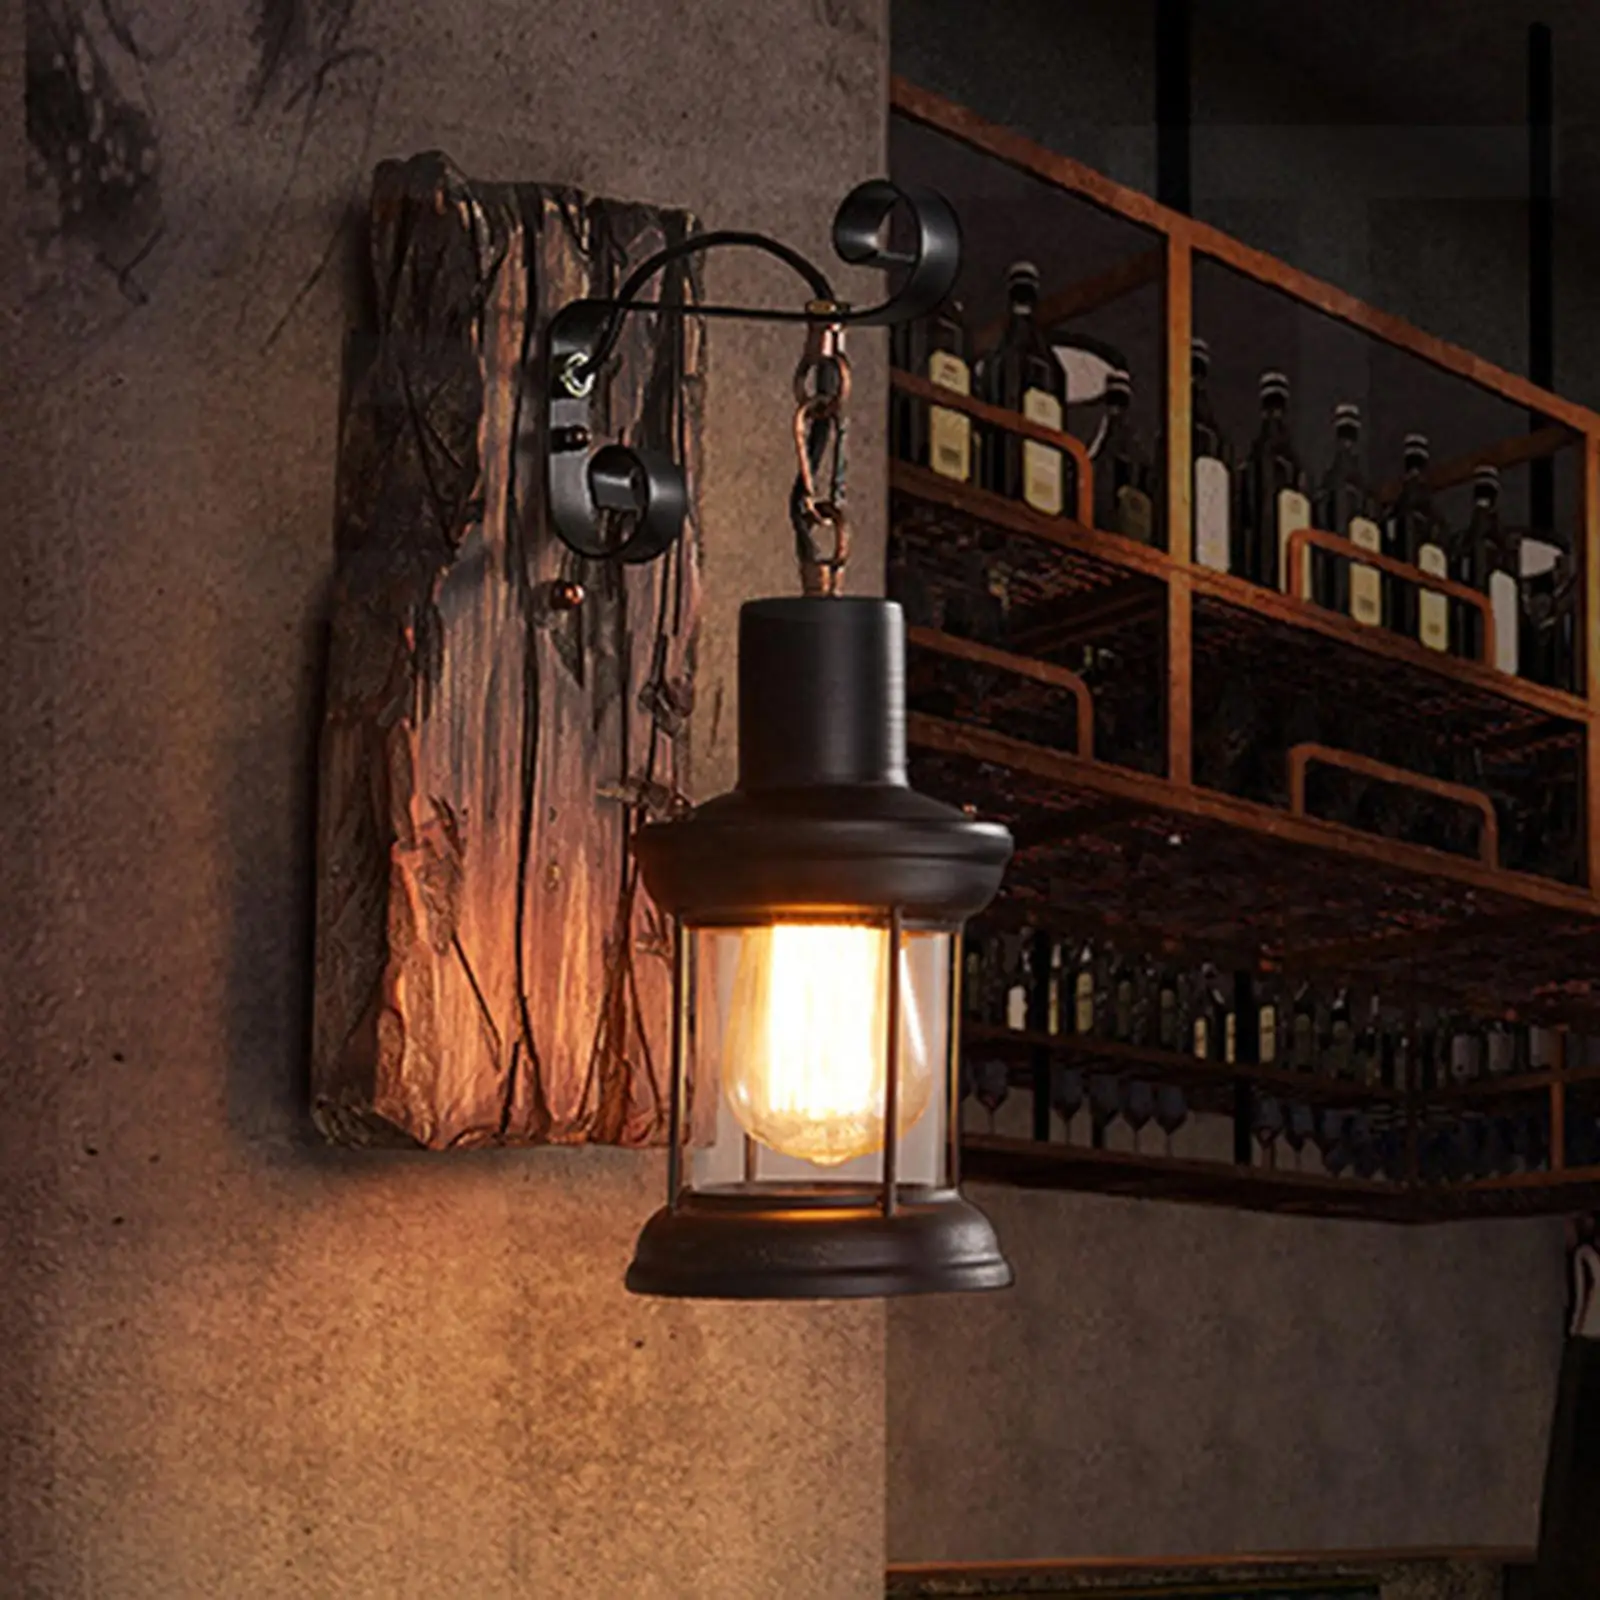  Style Industrial Wood Wall Sconce 27 Fixture Decorate Wall Lamp Glass Shade  for Restaurant